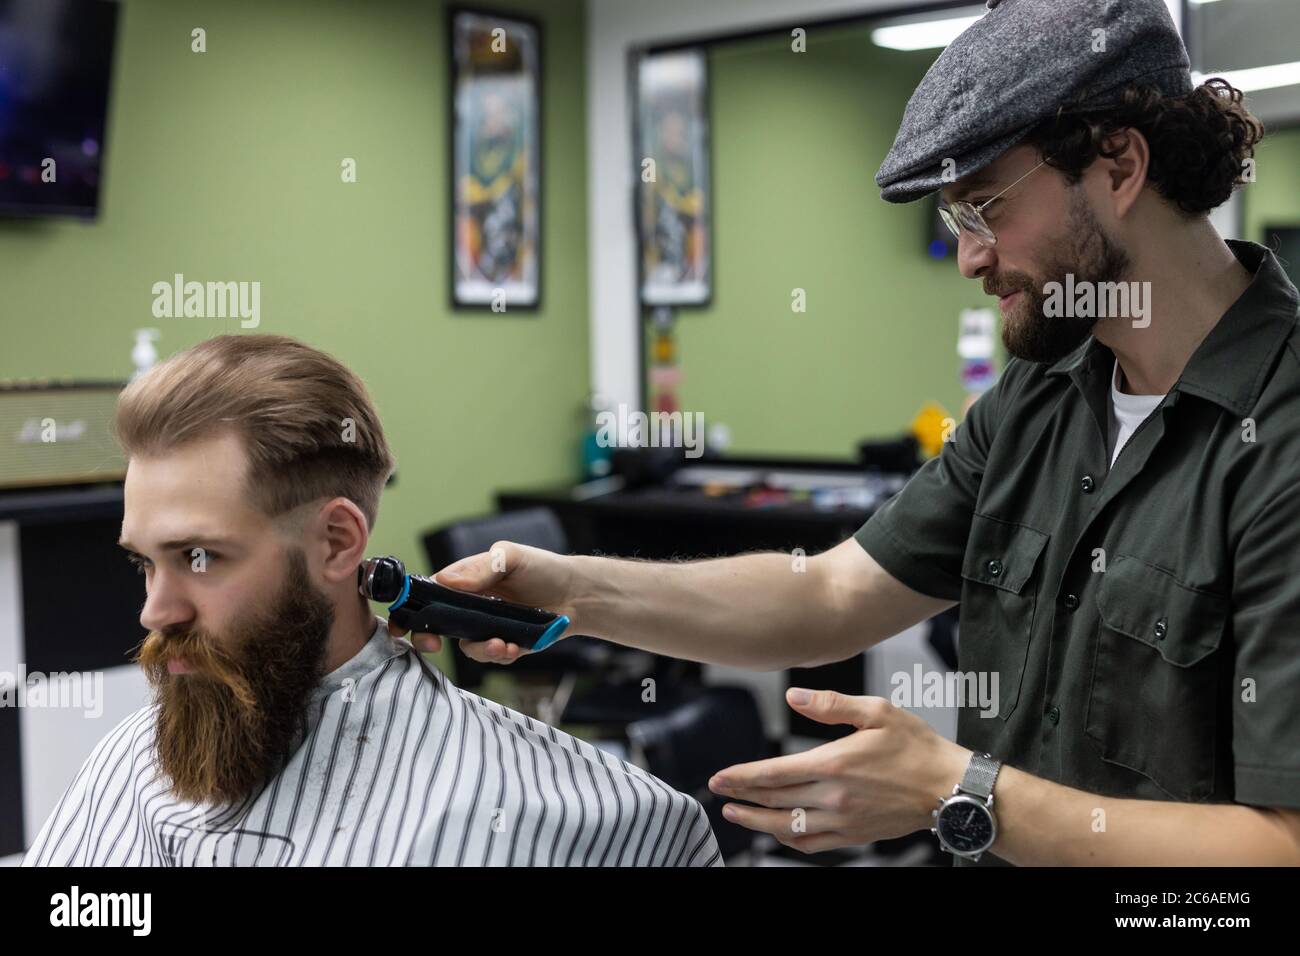 Haircut men Barbershop. Men's Hairdressers; barbers. Barber cuts the client machine for haircuts. Stock Photo